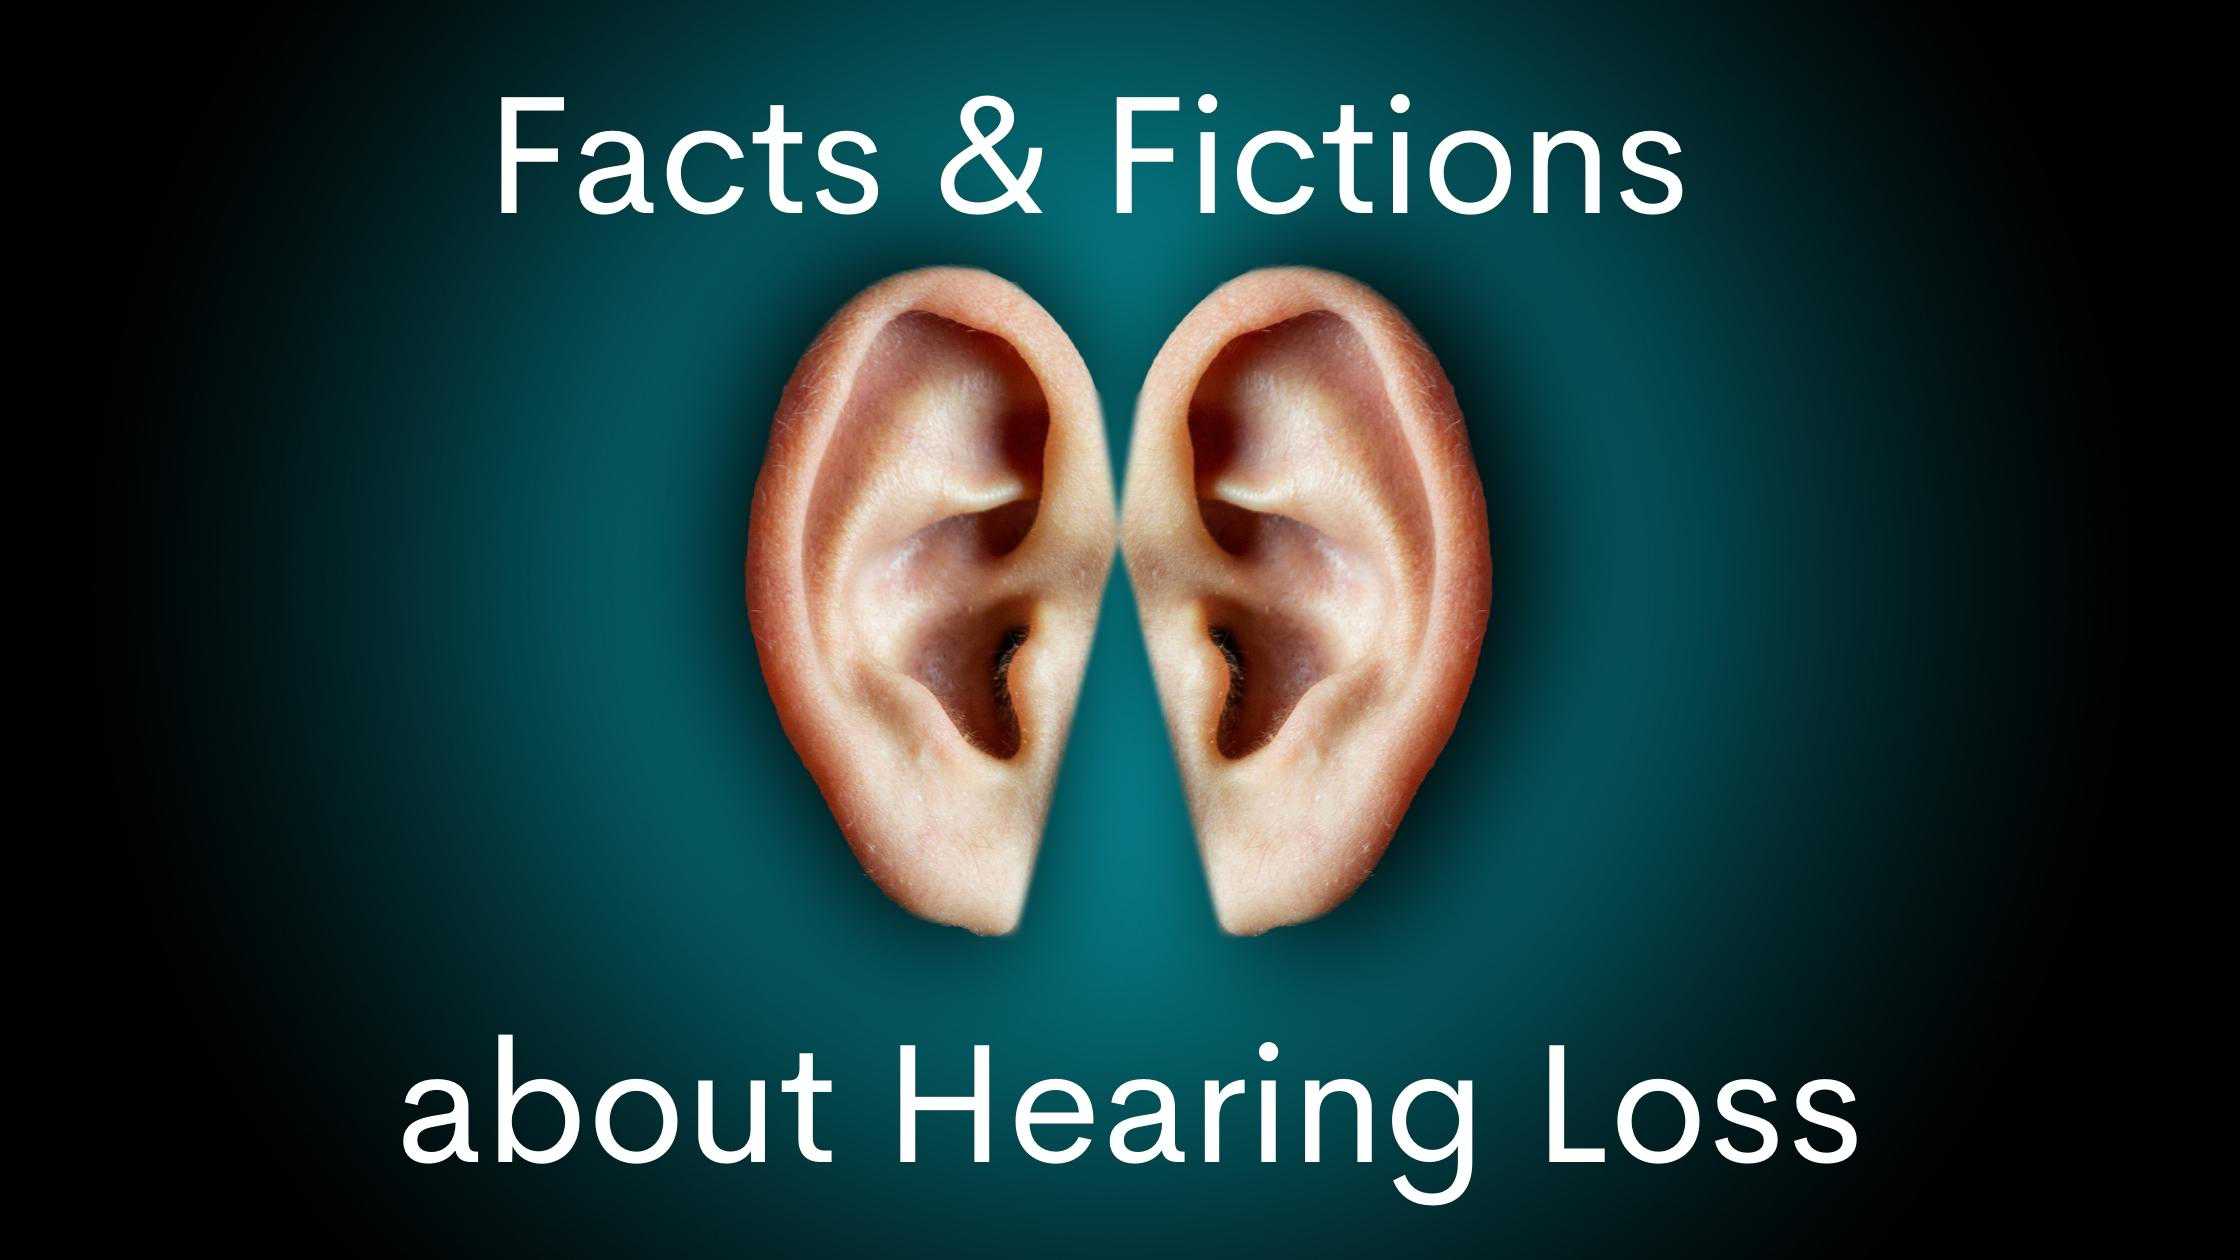 Facts and fiction about hearing loss